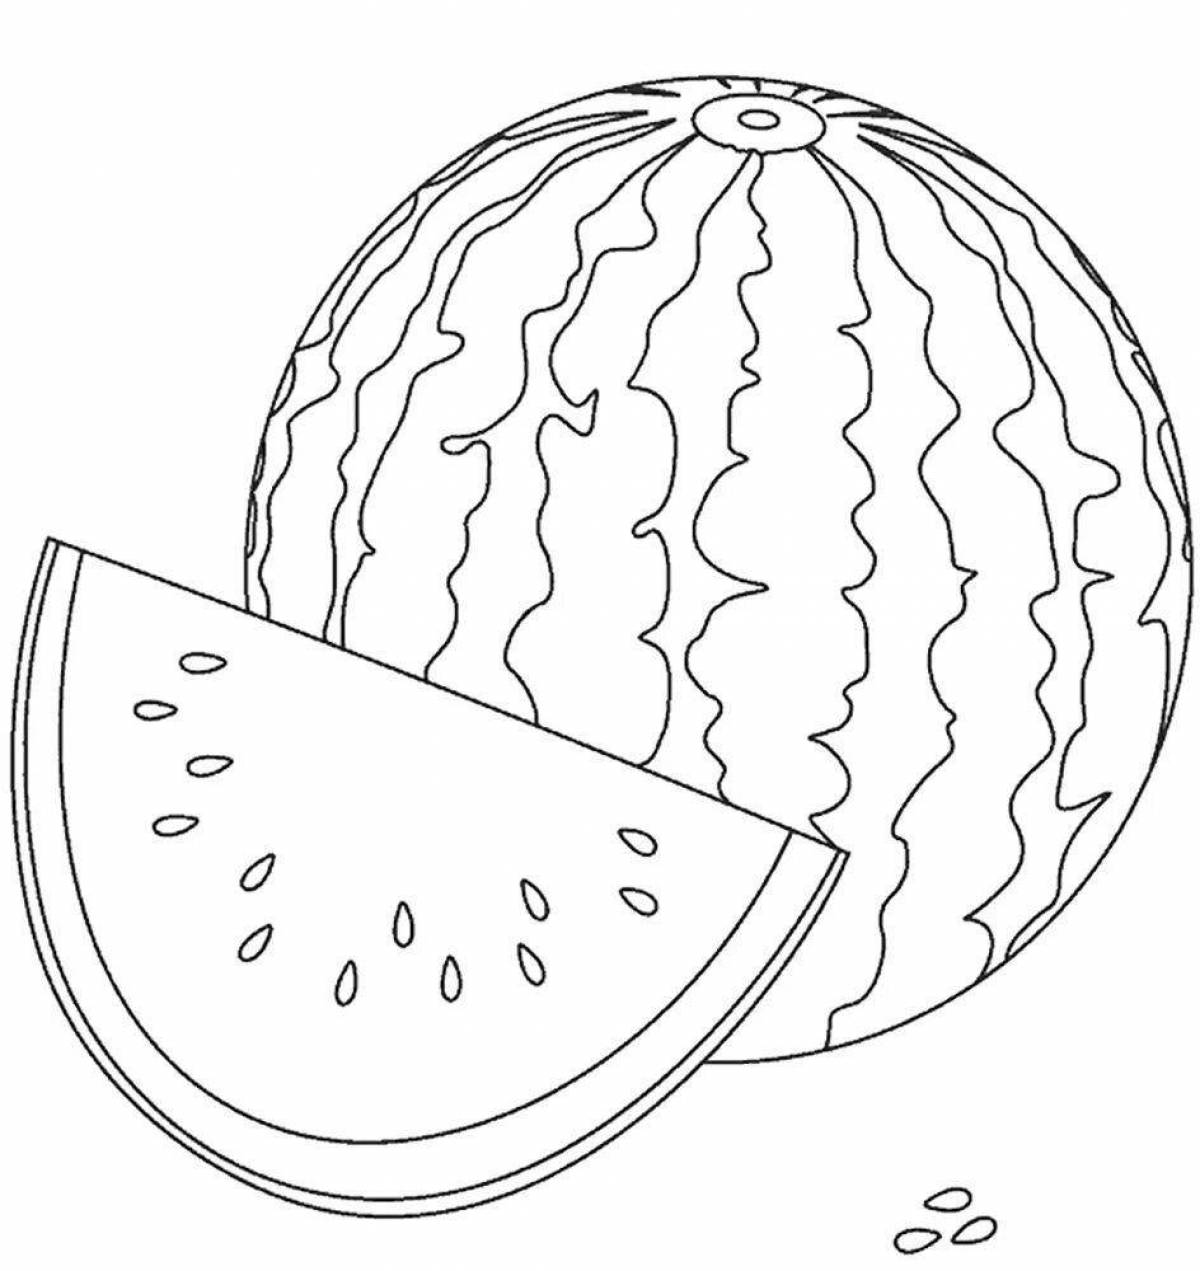 Exciting drawing of a watermelon